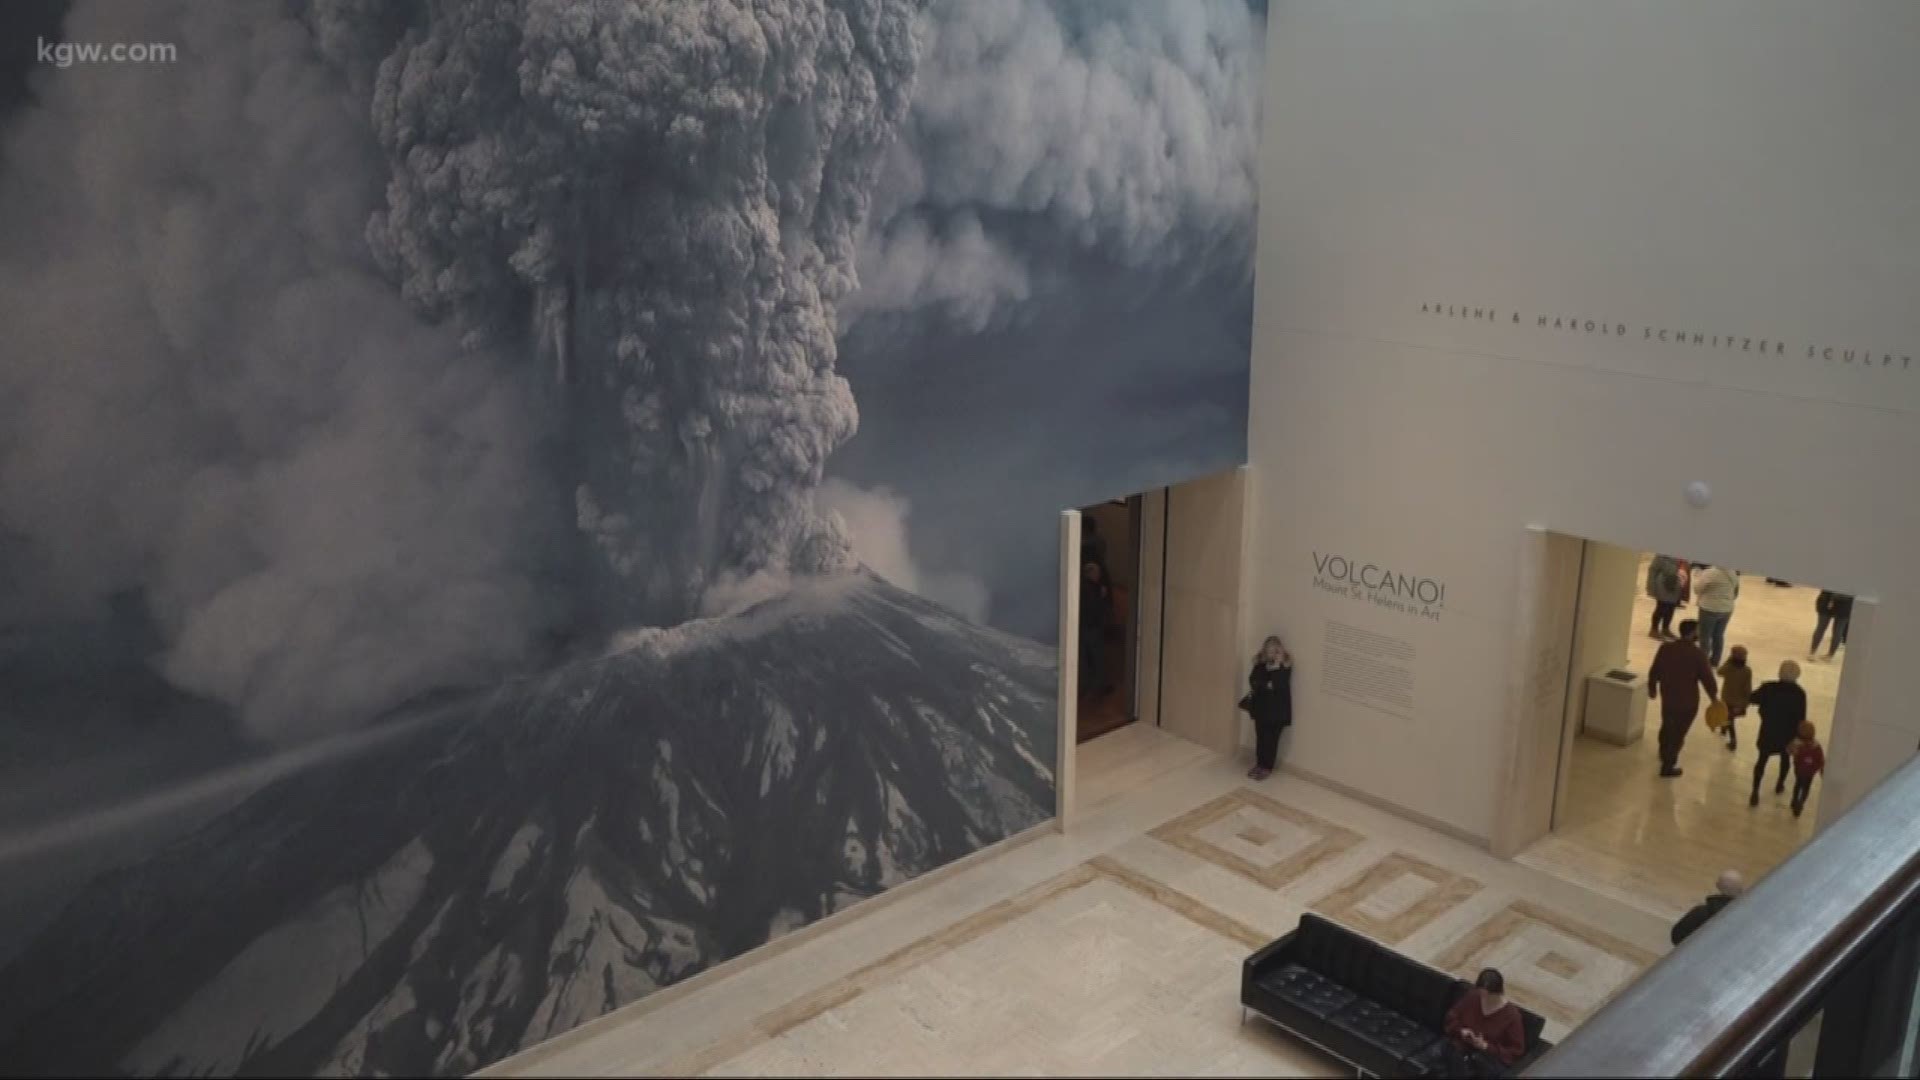 It was 40 years ago this year that Mt. St. Helens erupted. The Portland Art Museum is marking the anniversary with a special exhibit.